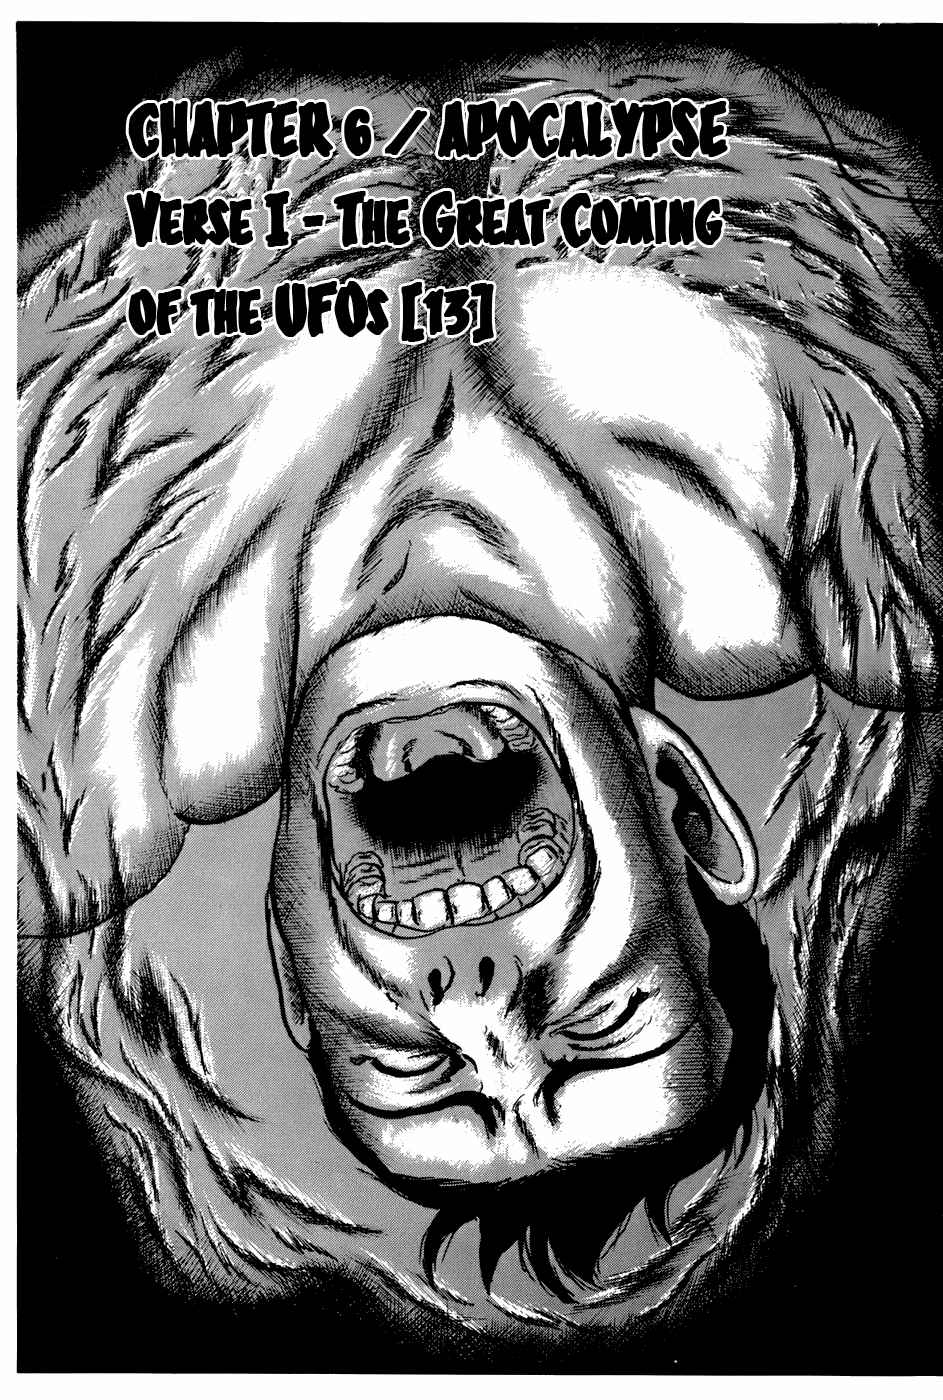 Fourteen Vol. 9 Ch. 165 Apocalypse Verse I The Great Coming of the UFOs (13)